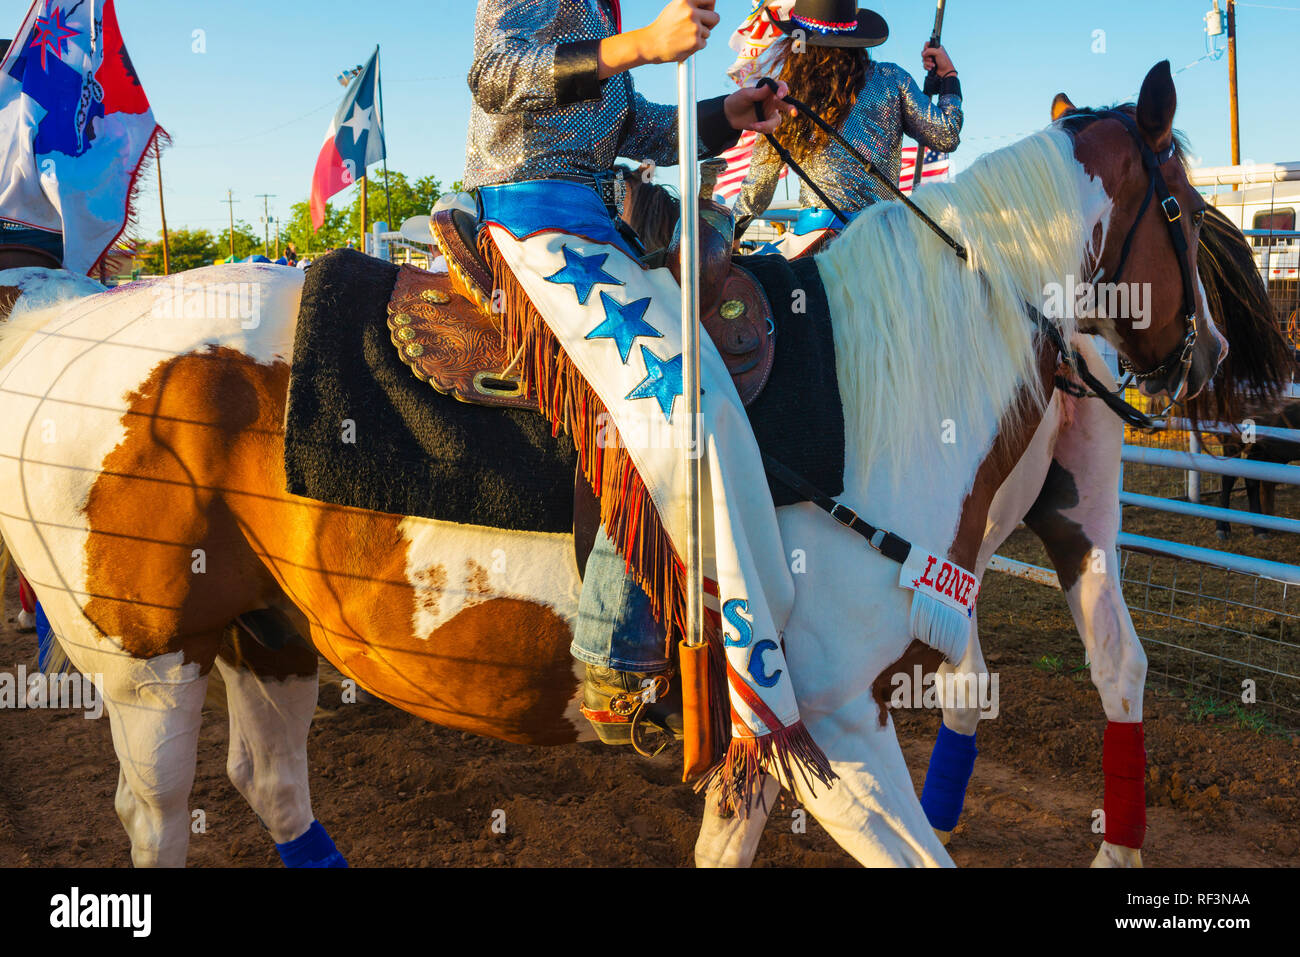 Lone Star Cowgirls in Texas Rodeo event Stockfoto